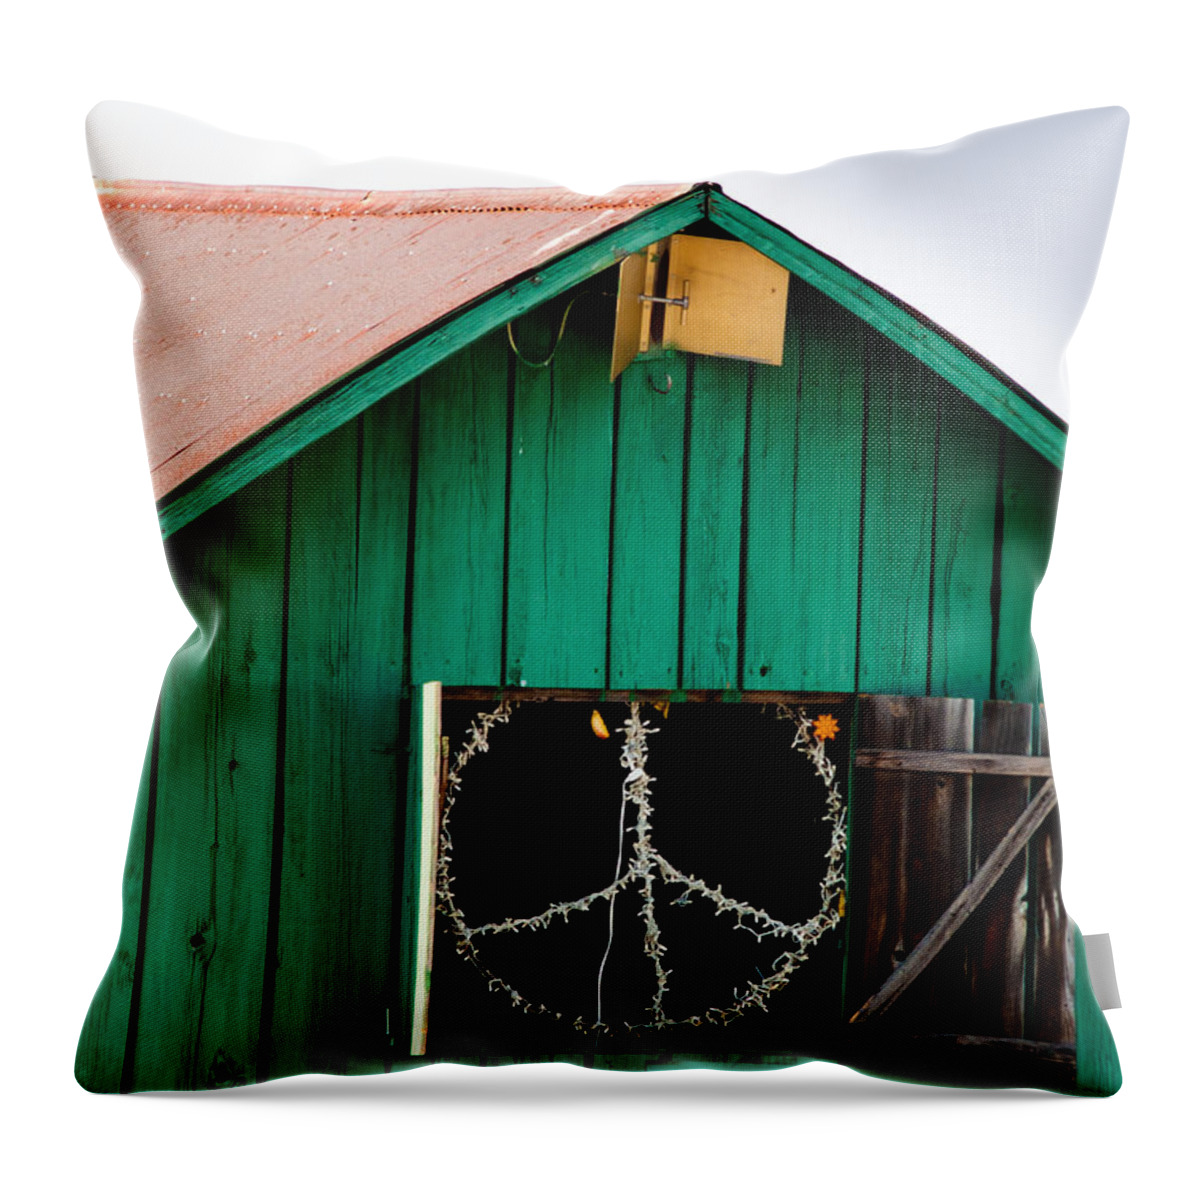 Bliss Throw Pillow featuring the photograph Peace Barn by Bill Gallagher